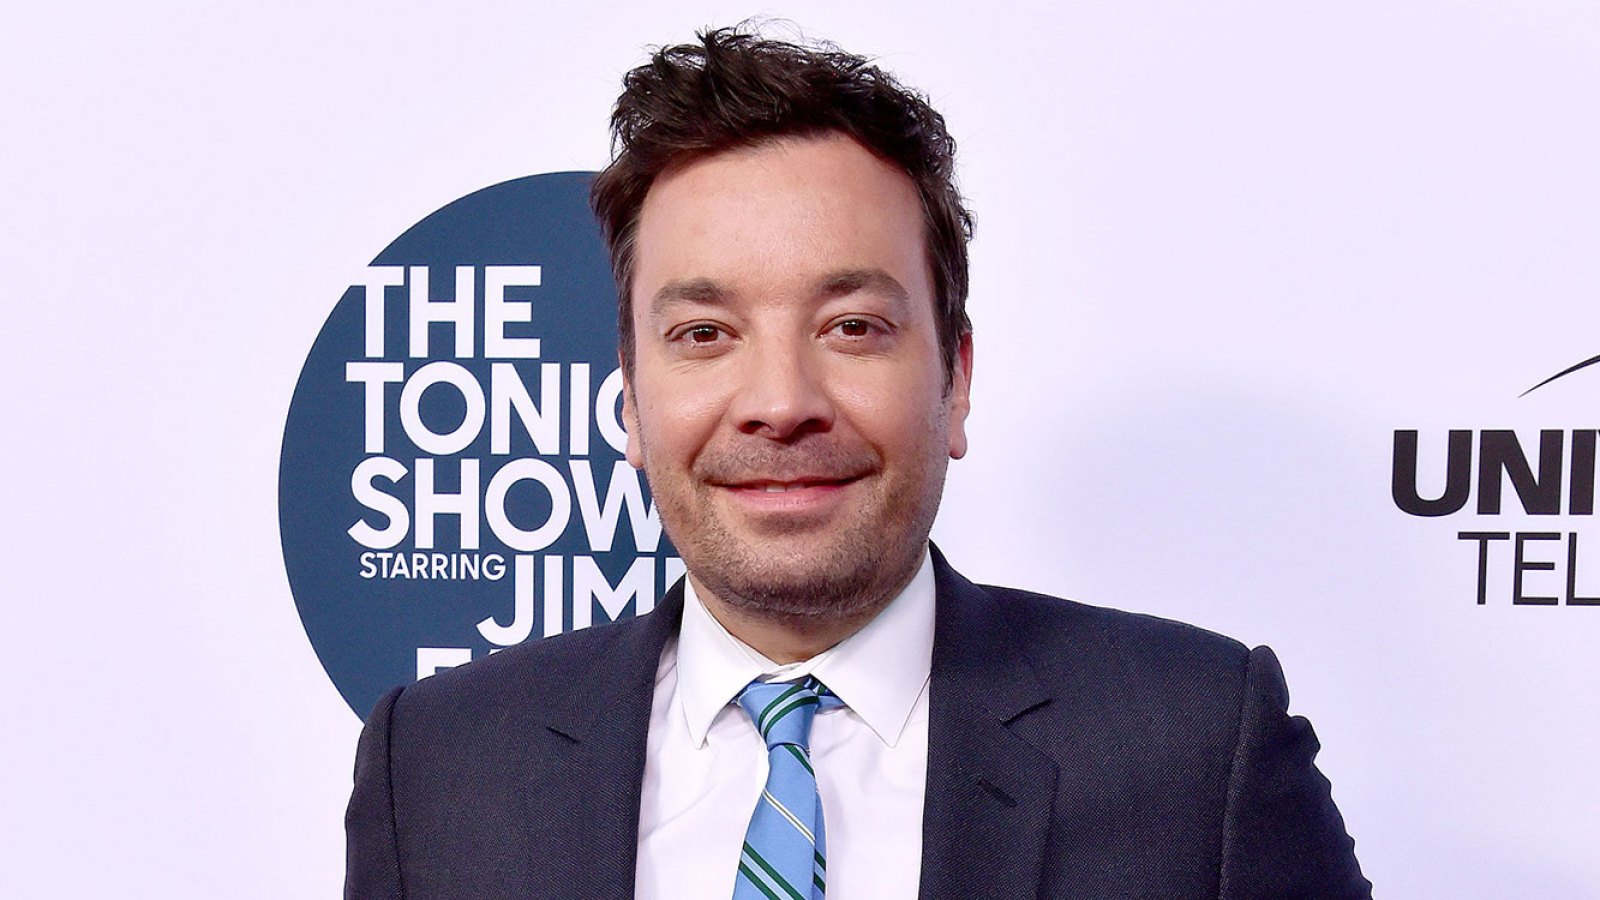 Jimmy Fallon Is a Regular Patron at New York's GupShup Restaurant and Cocktail Bar